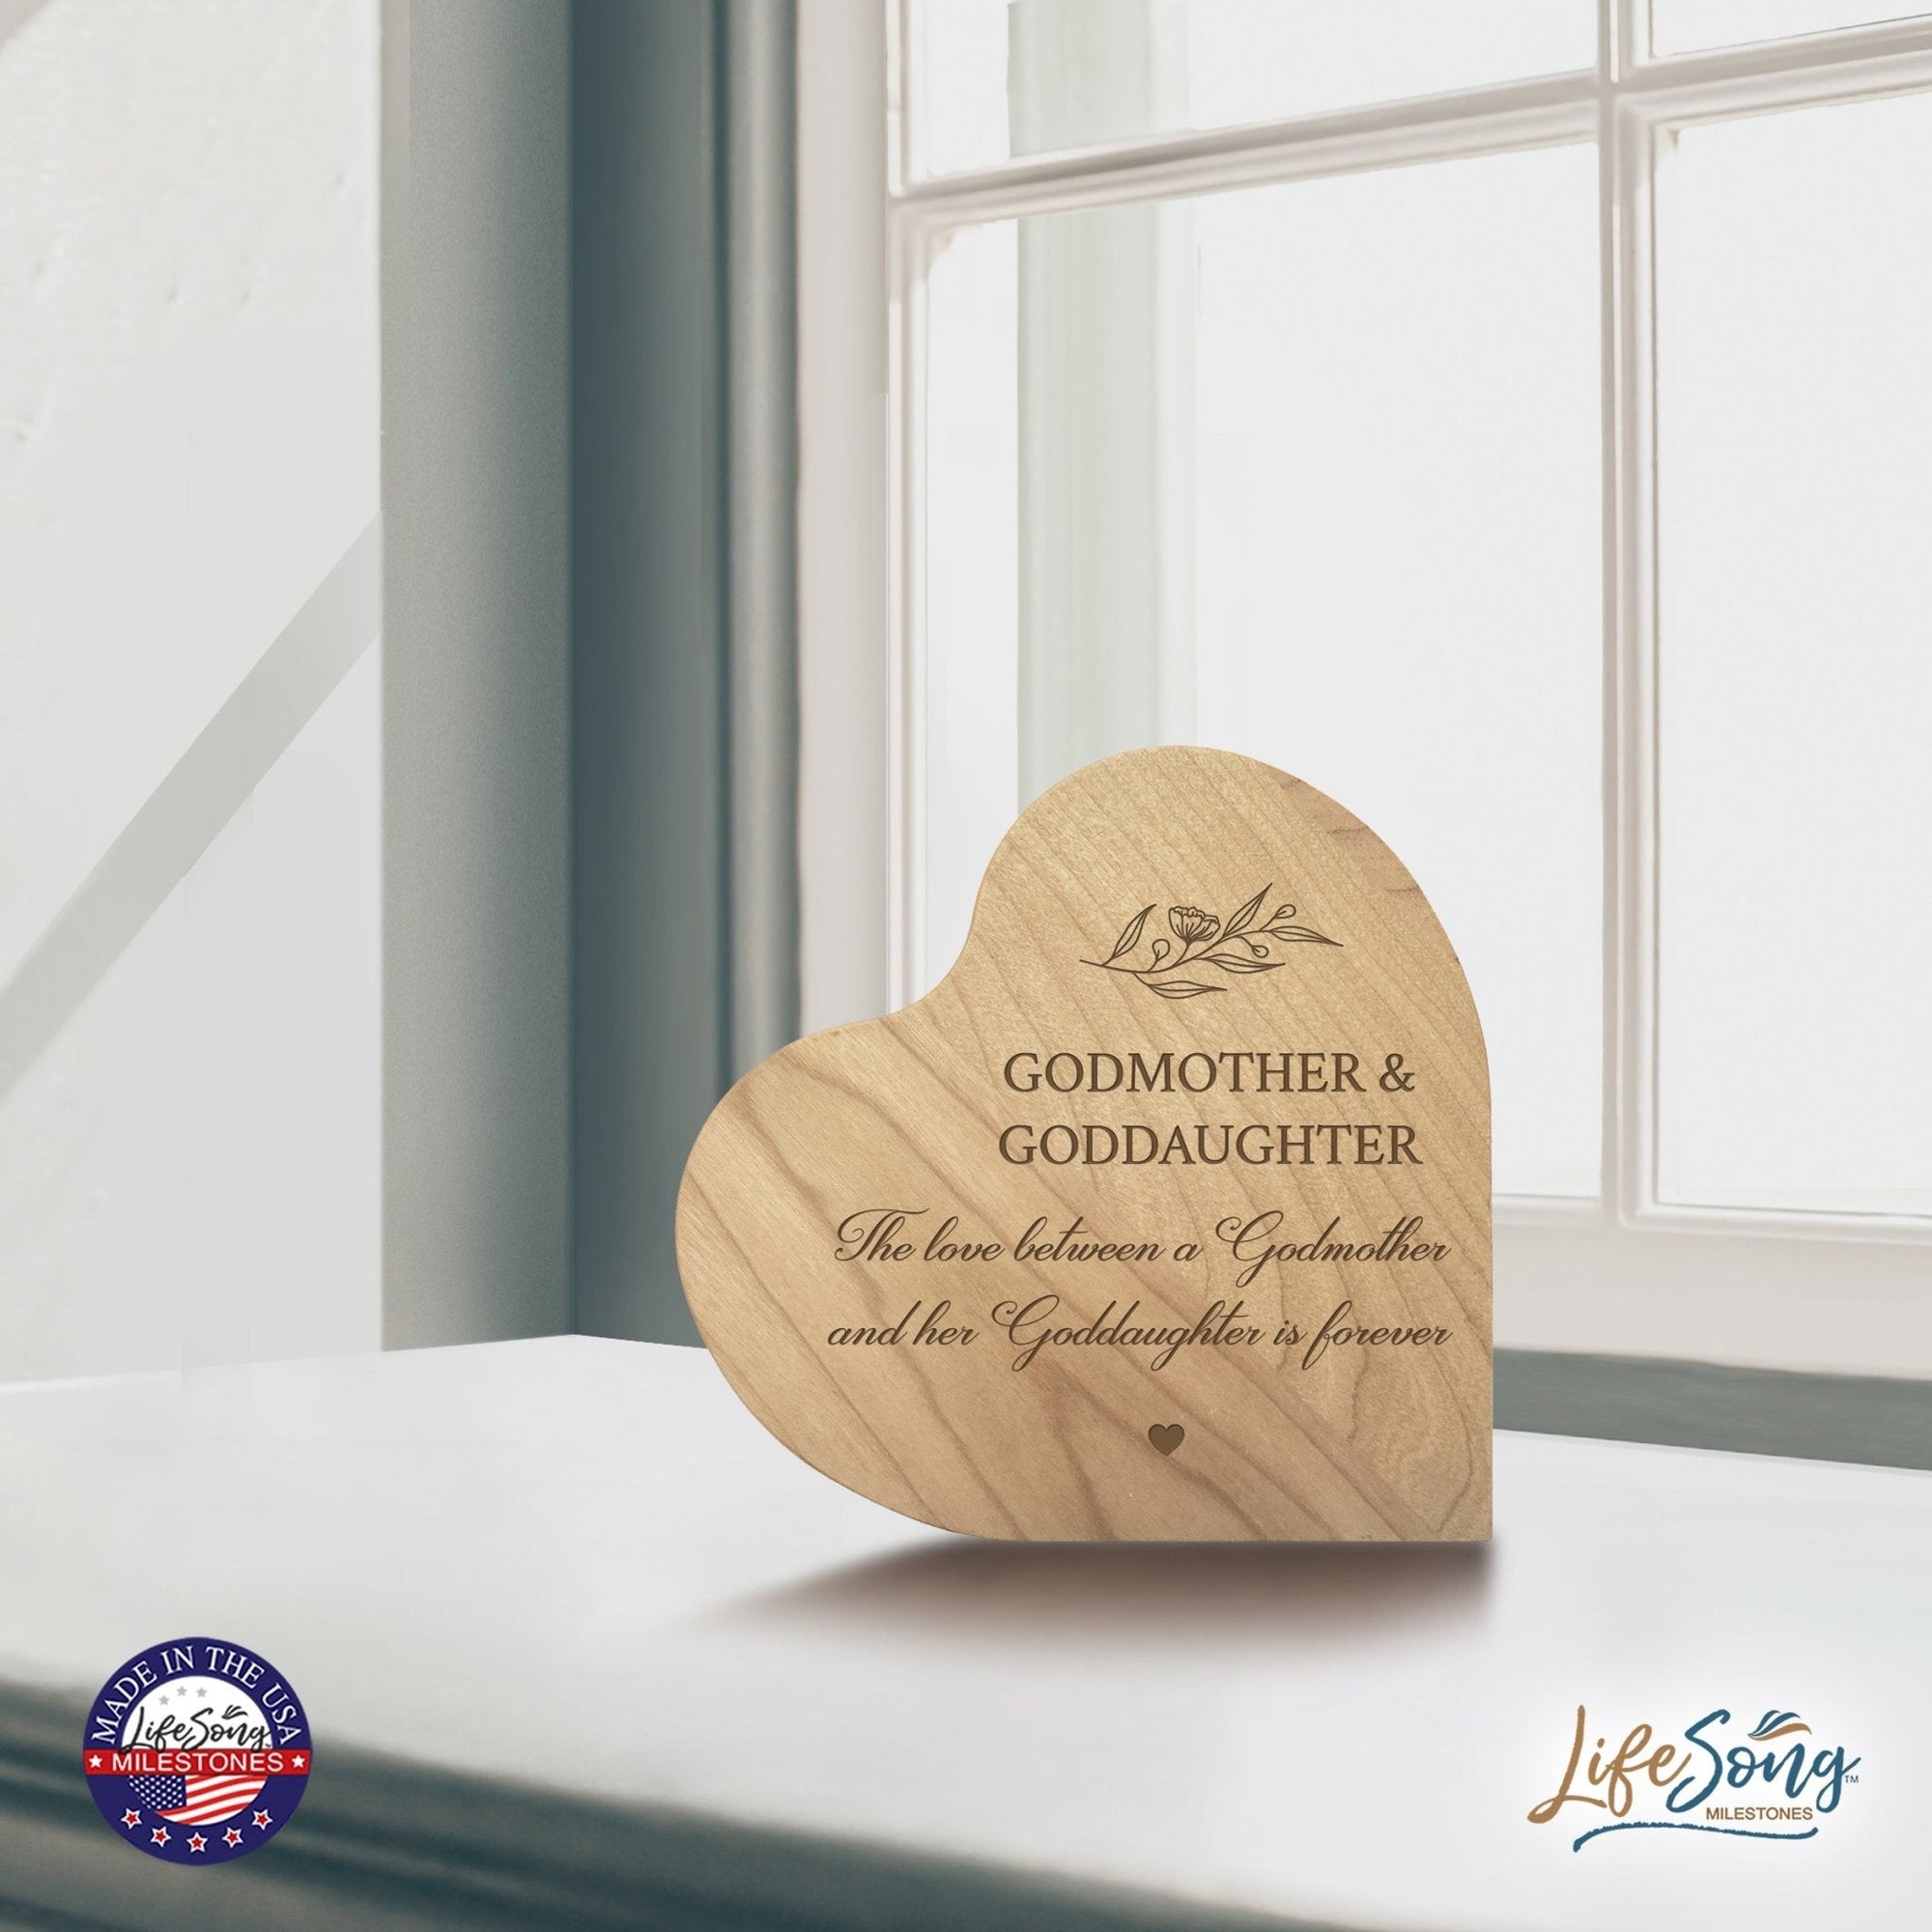 Modern Godmother’s Love Solid Wood Heart Decoration With Inspirational Verse Keepsake Gift 5x5.25 - Godmother & Goddaughter - LifeSong Milestones